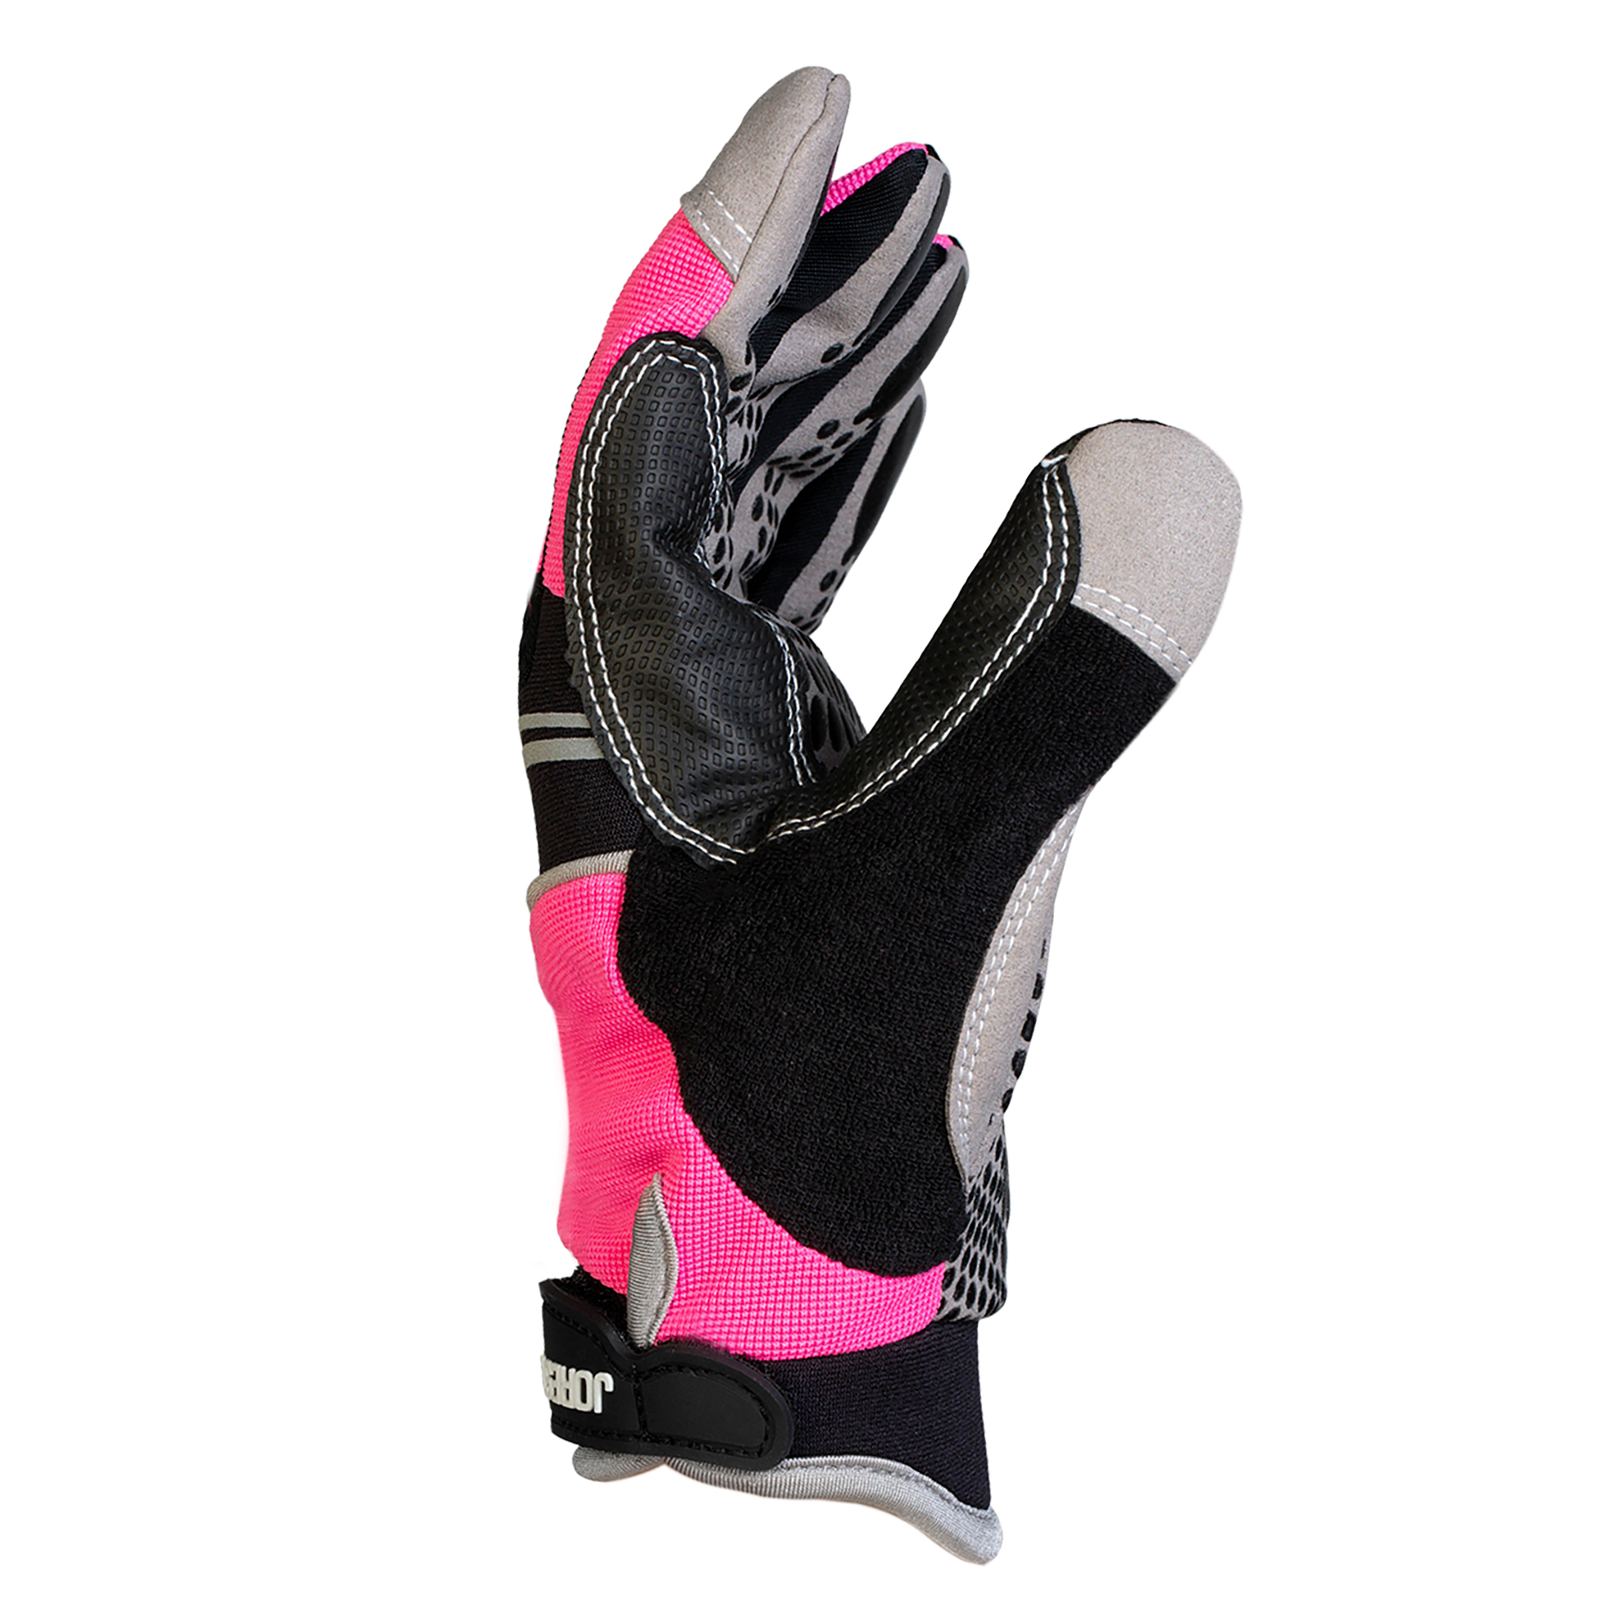 Side view of 1 pink JORESTECH safety work glove with anti slip silicone black dotted palms